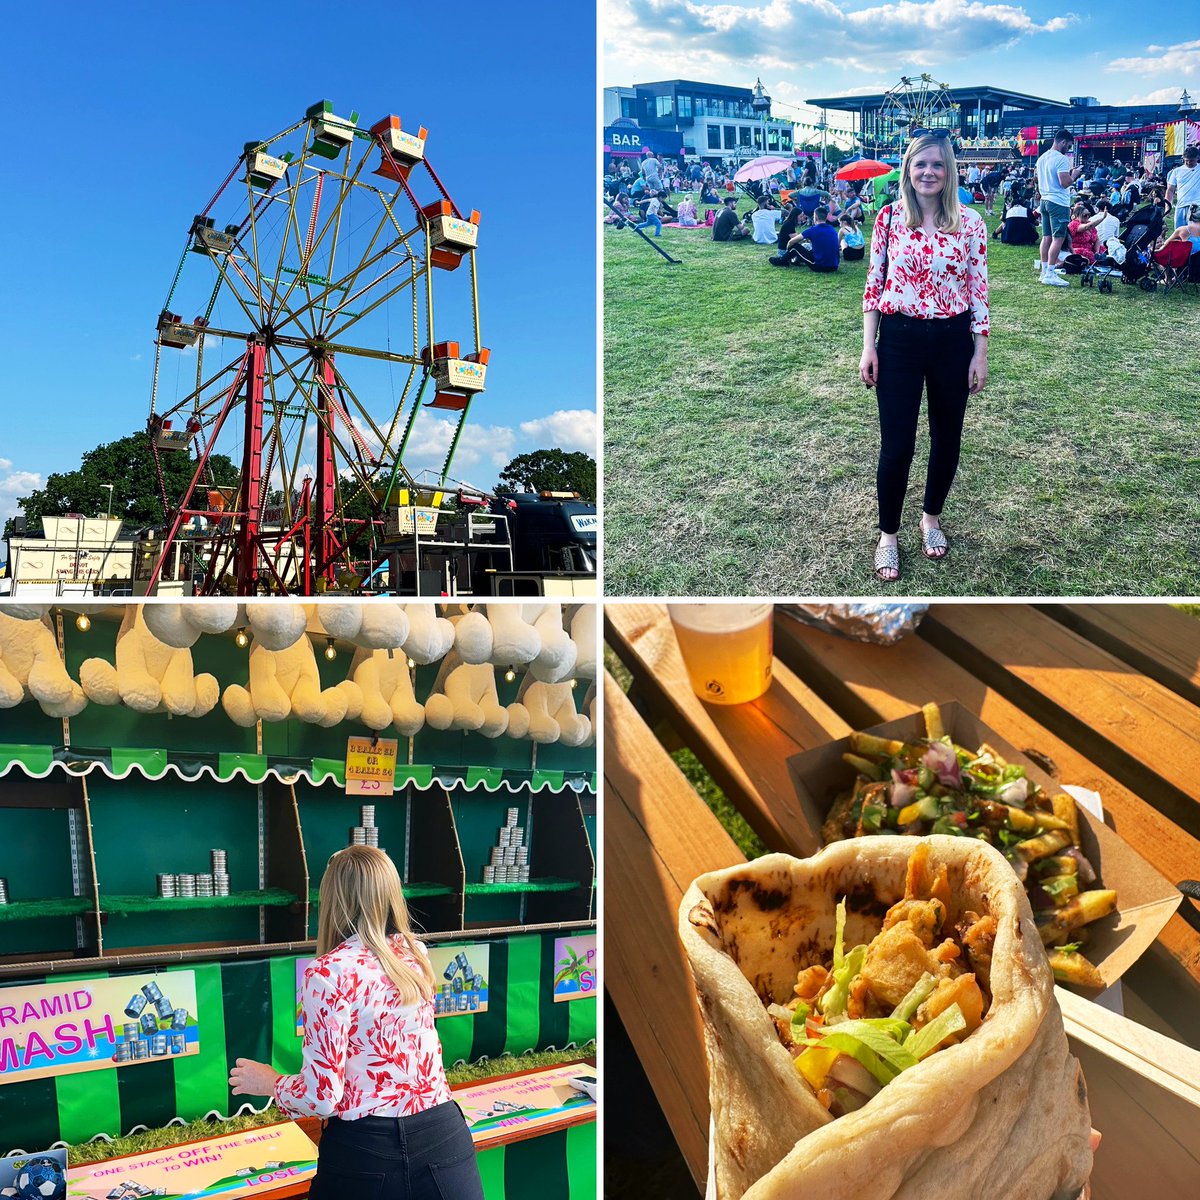 Perfect weather for the @SGFoodFestival at the @bbsciencepark here in Emersons Green ☀️ 

@mookiesindian pakora naan wrap was excellent, as were the local produce and crafts, live music, games and rides 🎡